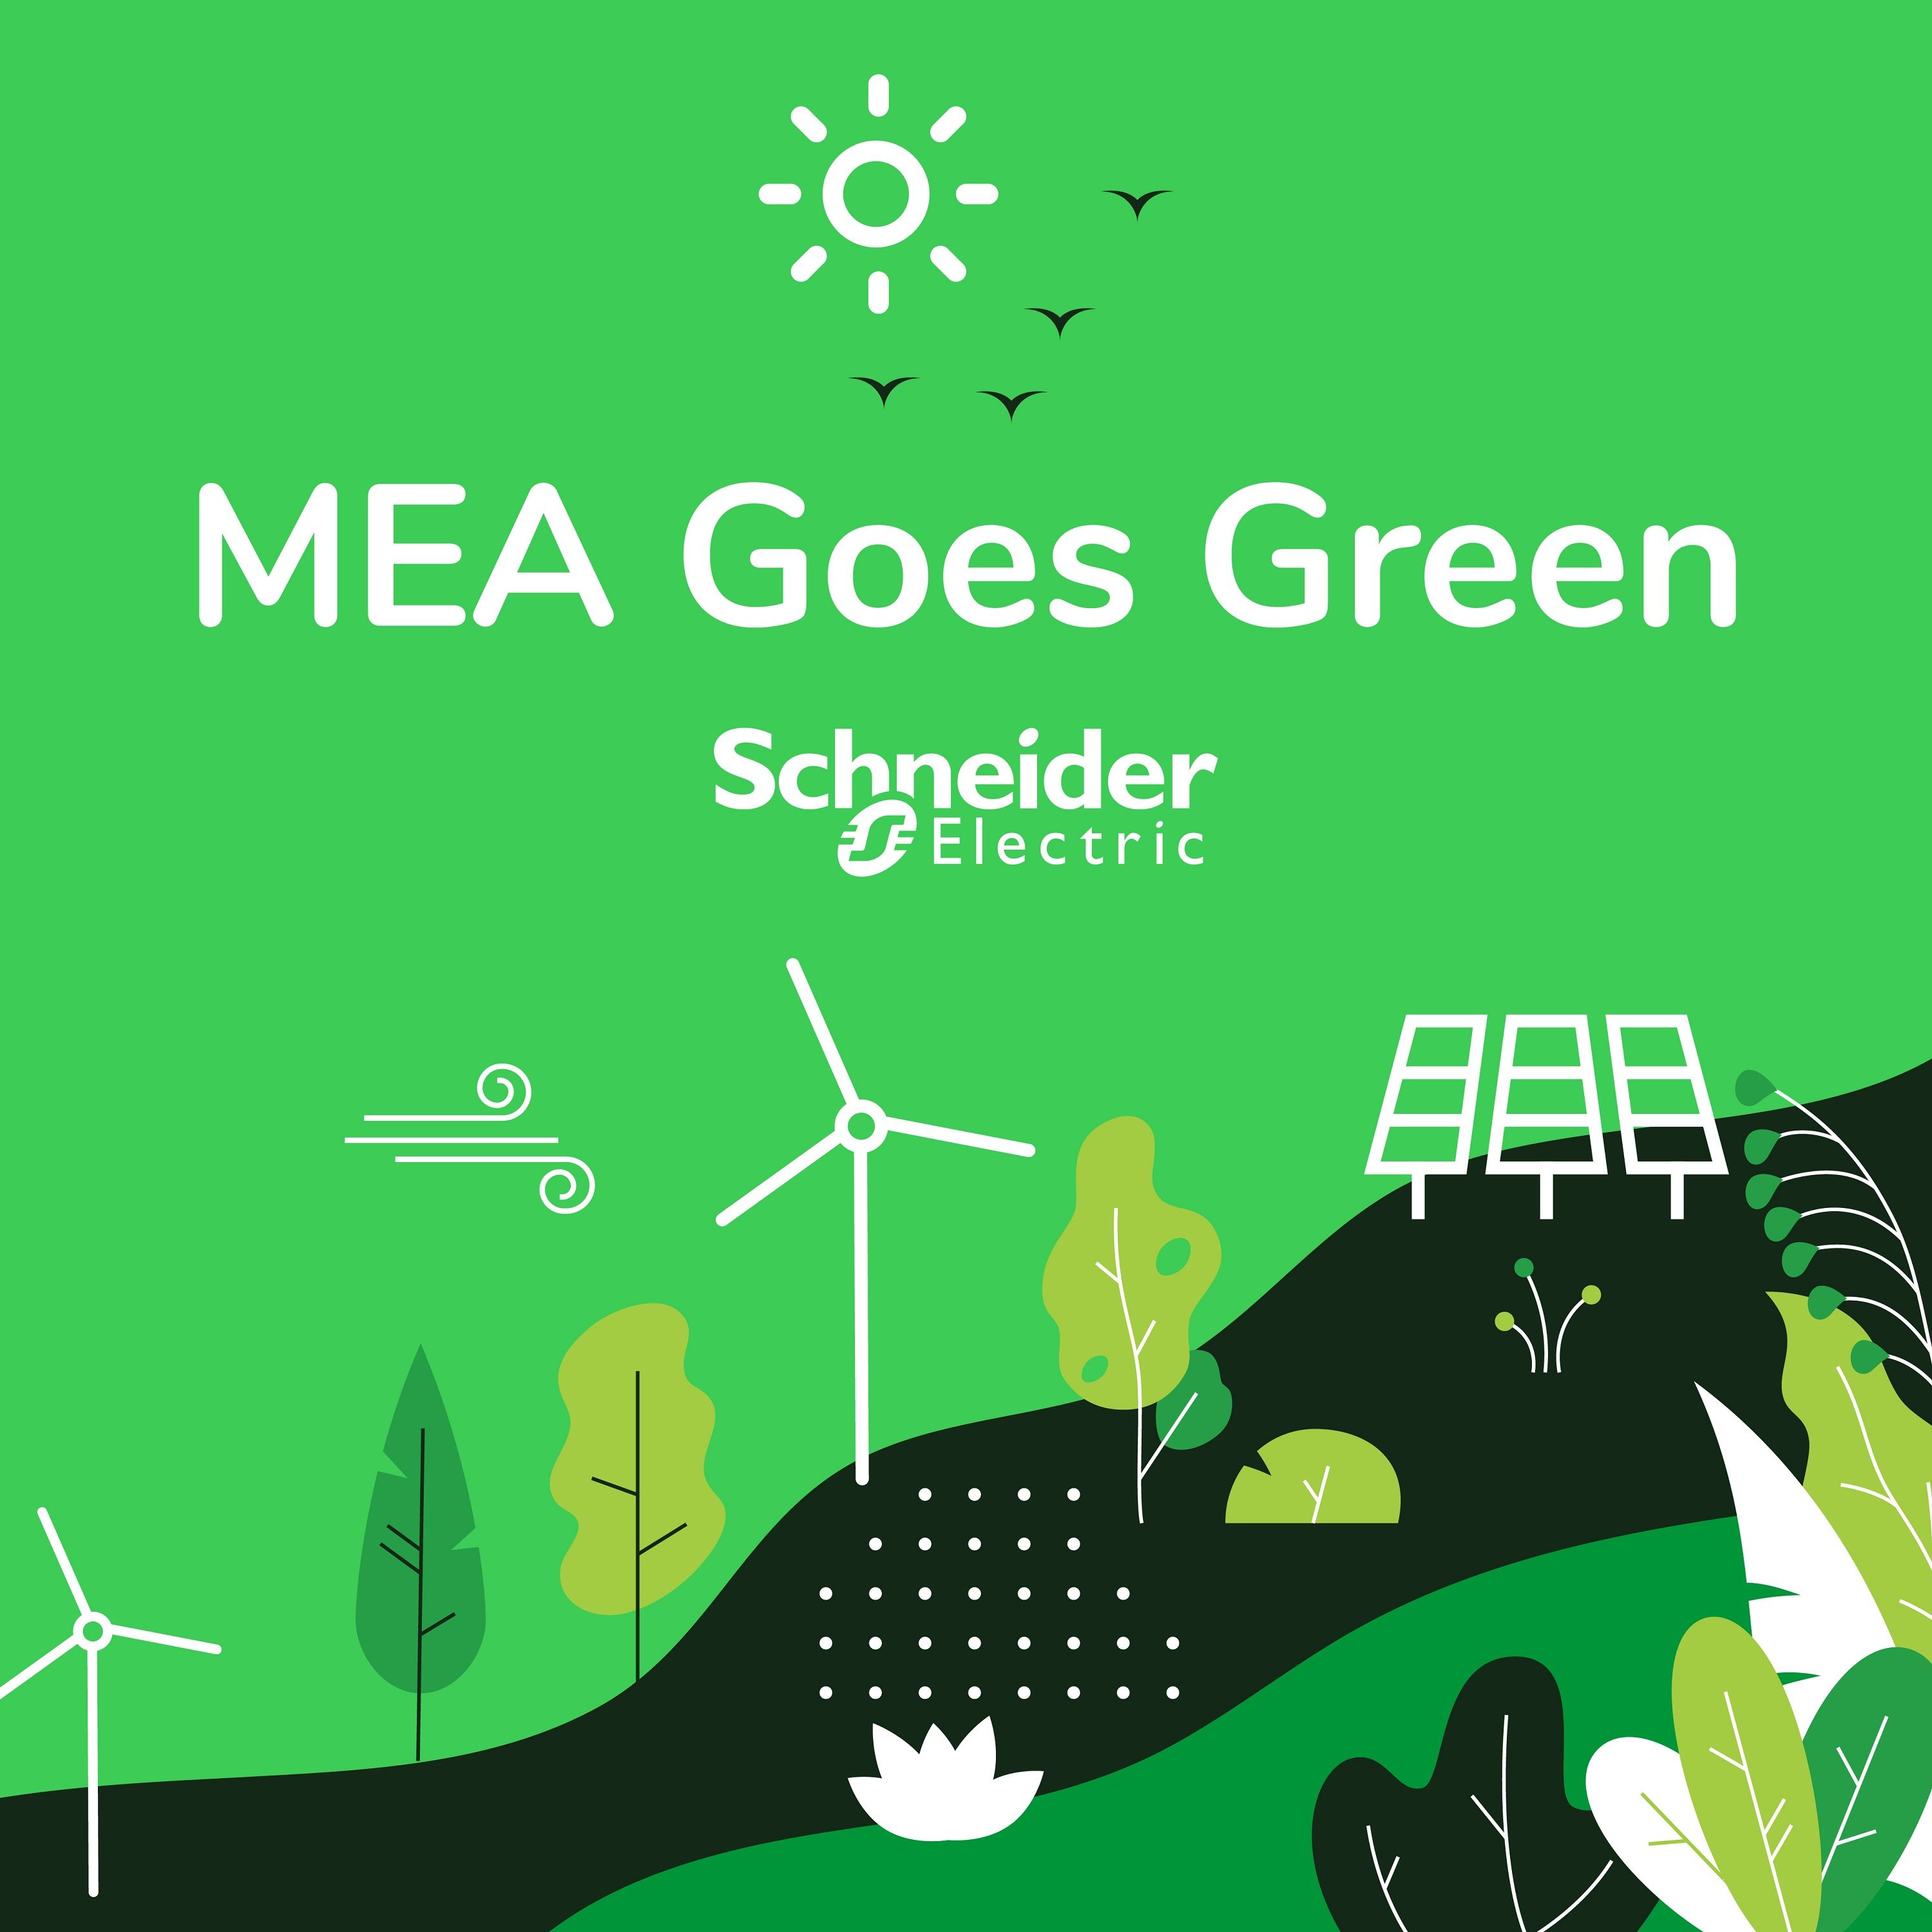 Schneider Electric MEA Goes Green Podcast